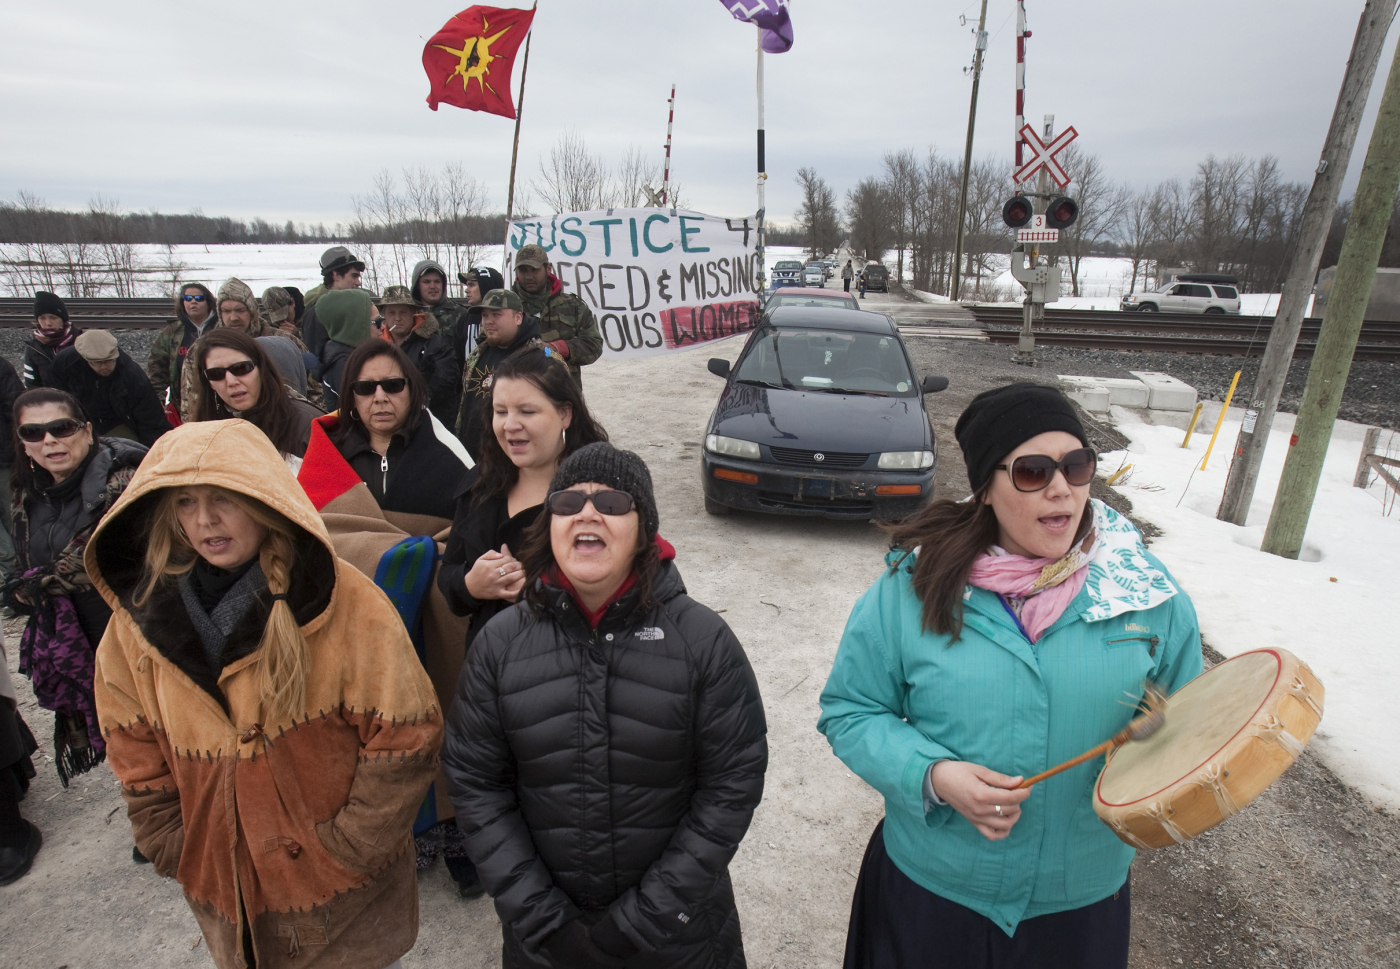 Protesters bang indigenous drums to protest the hundreds of missing or murdered indigenous women in the country, what many call institutional racism.